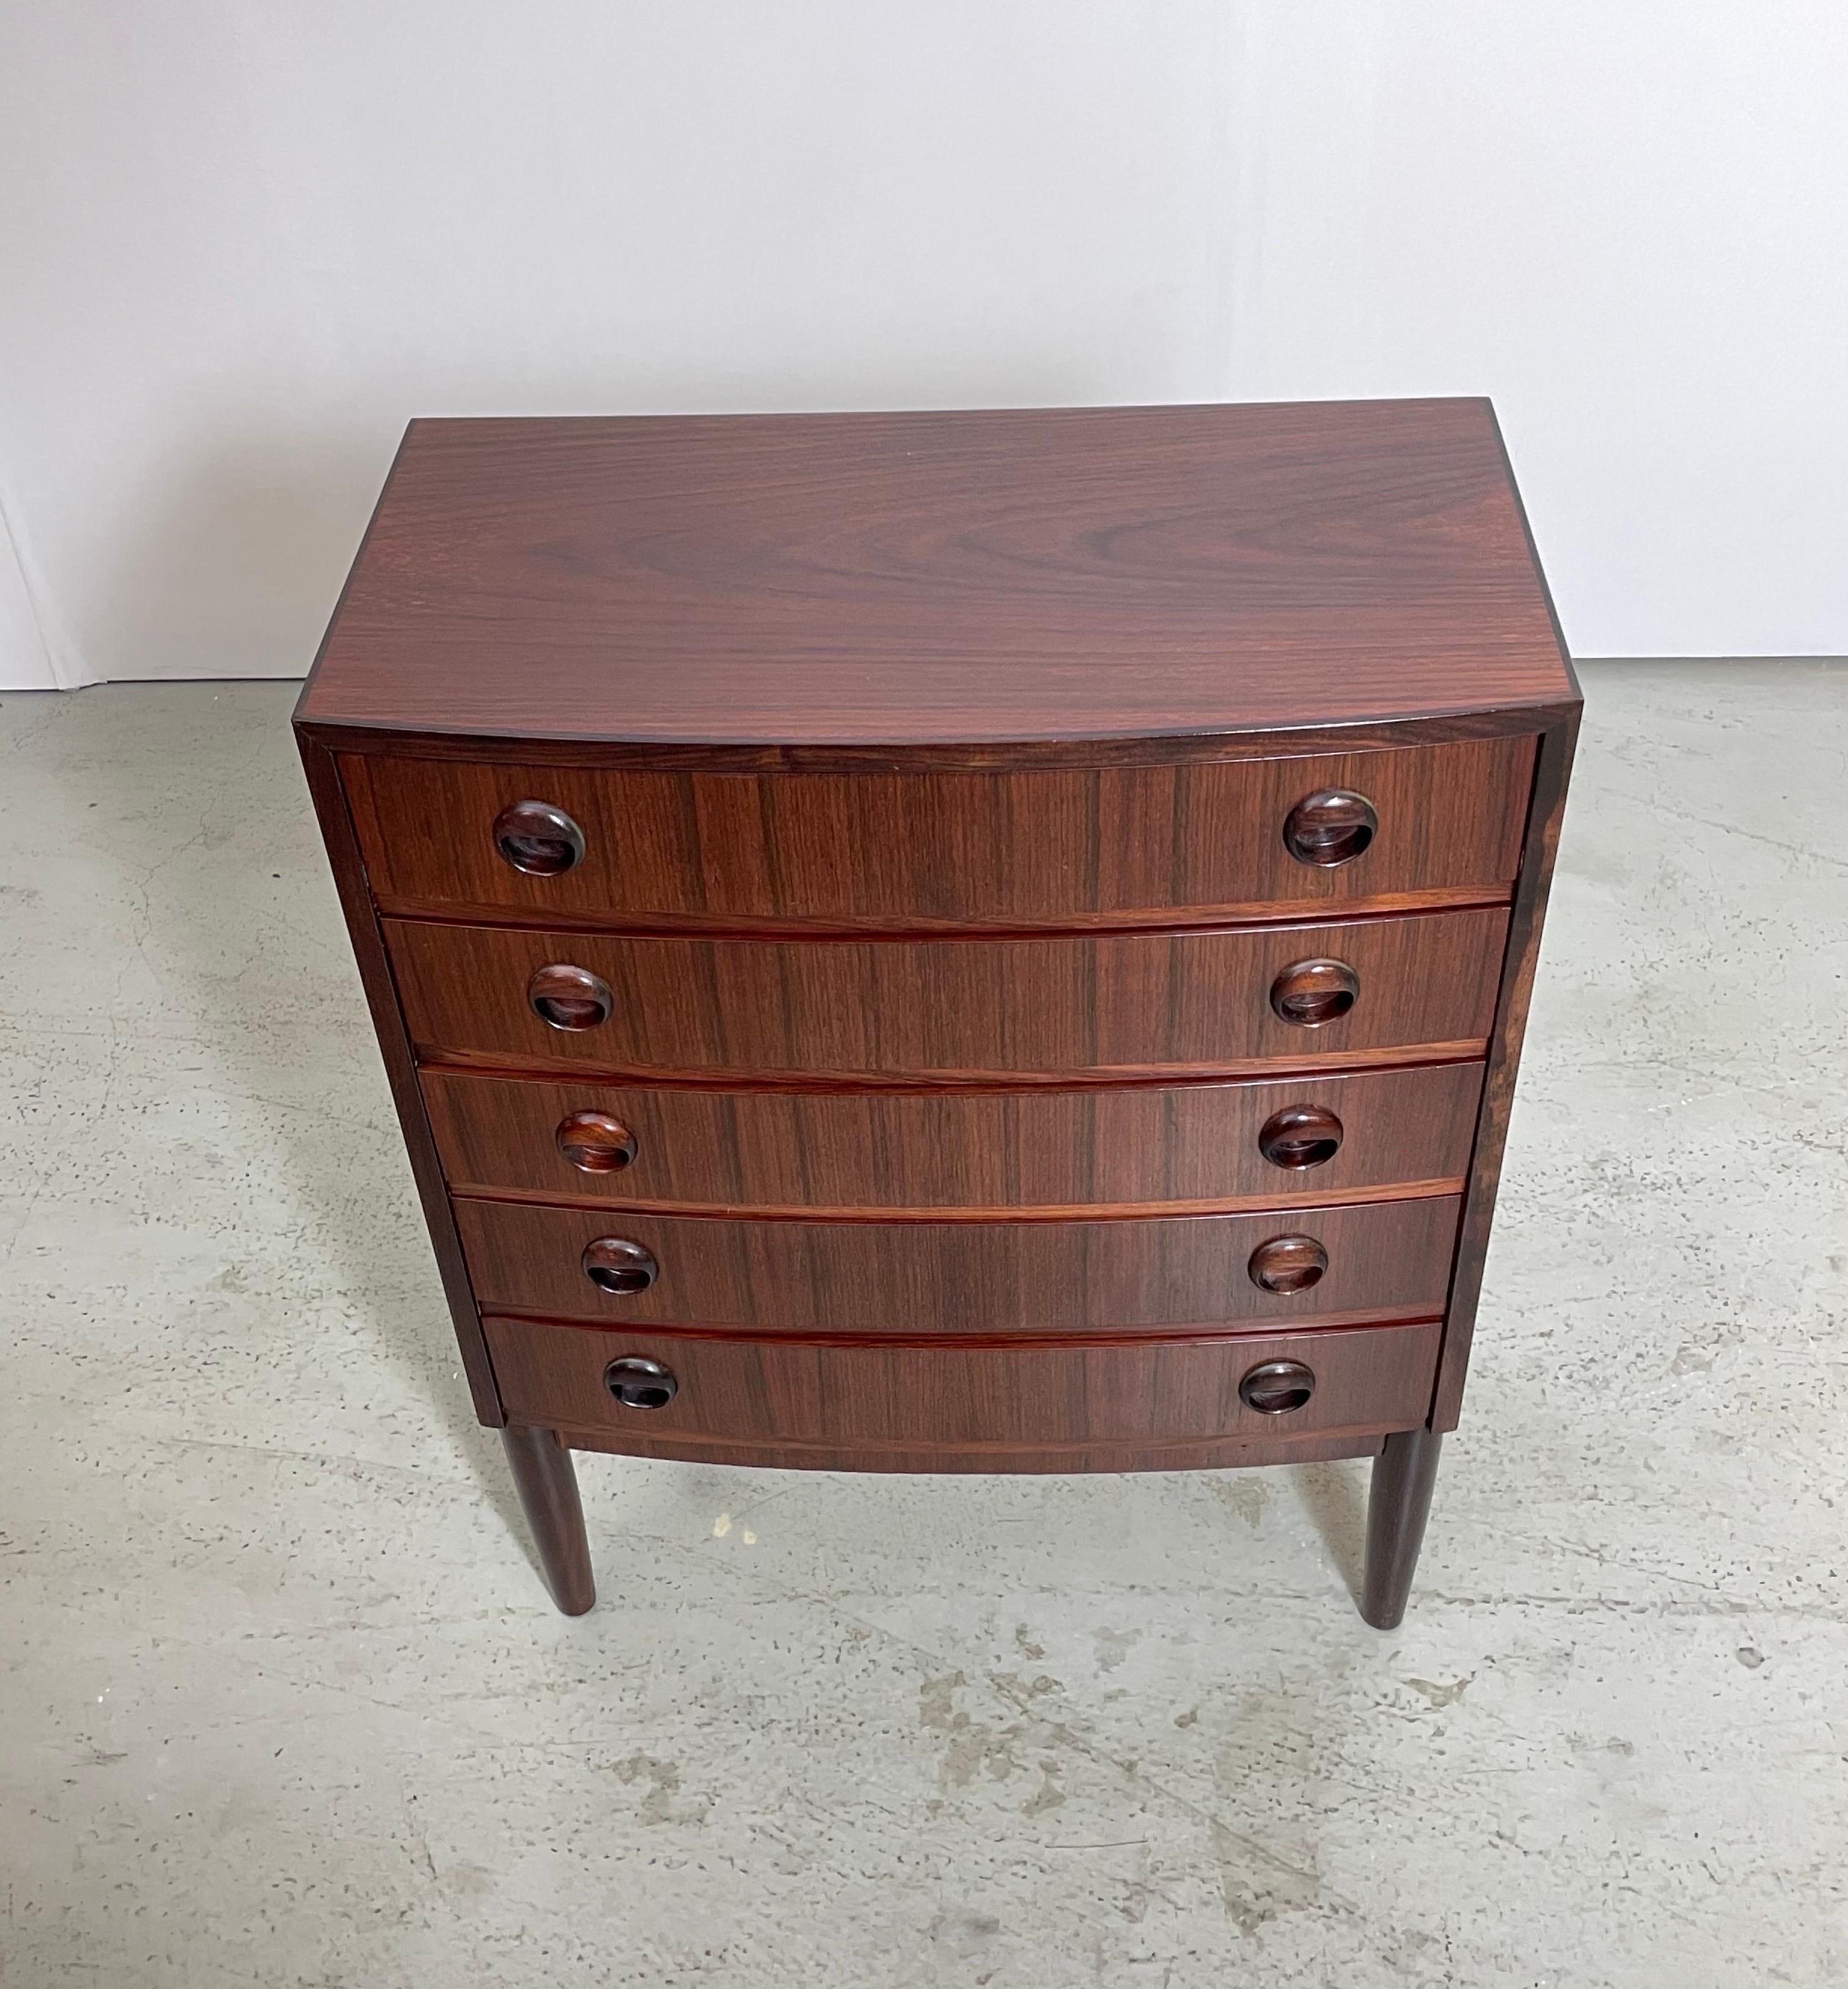 Mid-century chest of drawers designed by Kai Kristiansen. It was produced in Denmark during the 1960's. This is a rare piece made of rosewood which shows a remarkable wood grain. The high-quality craftsmanship is notable in the details such as the